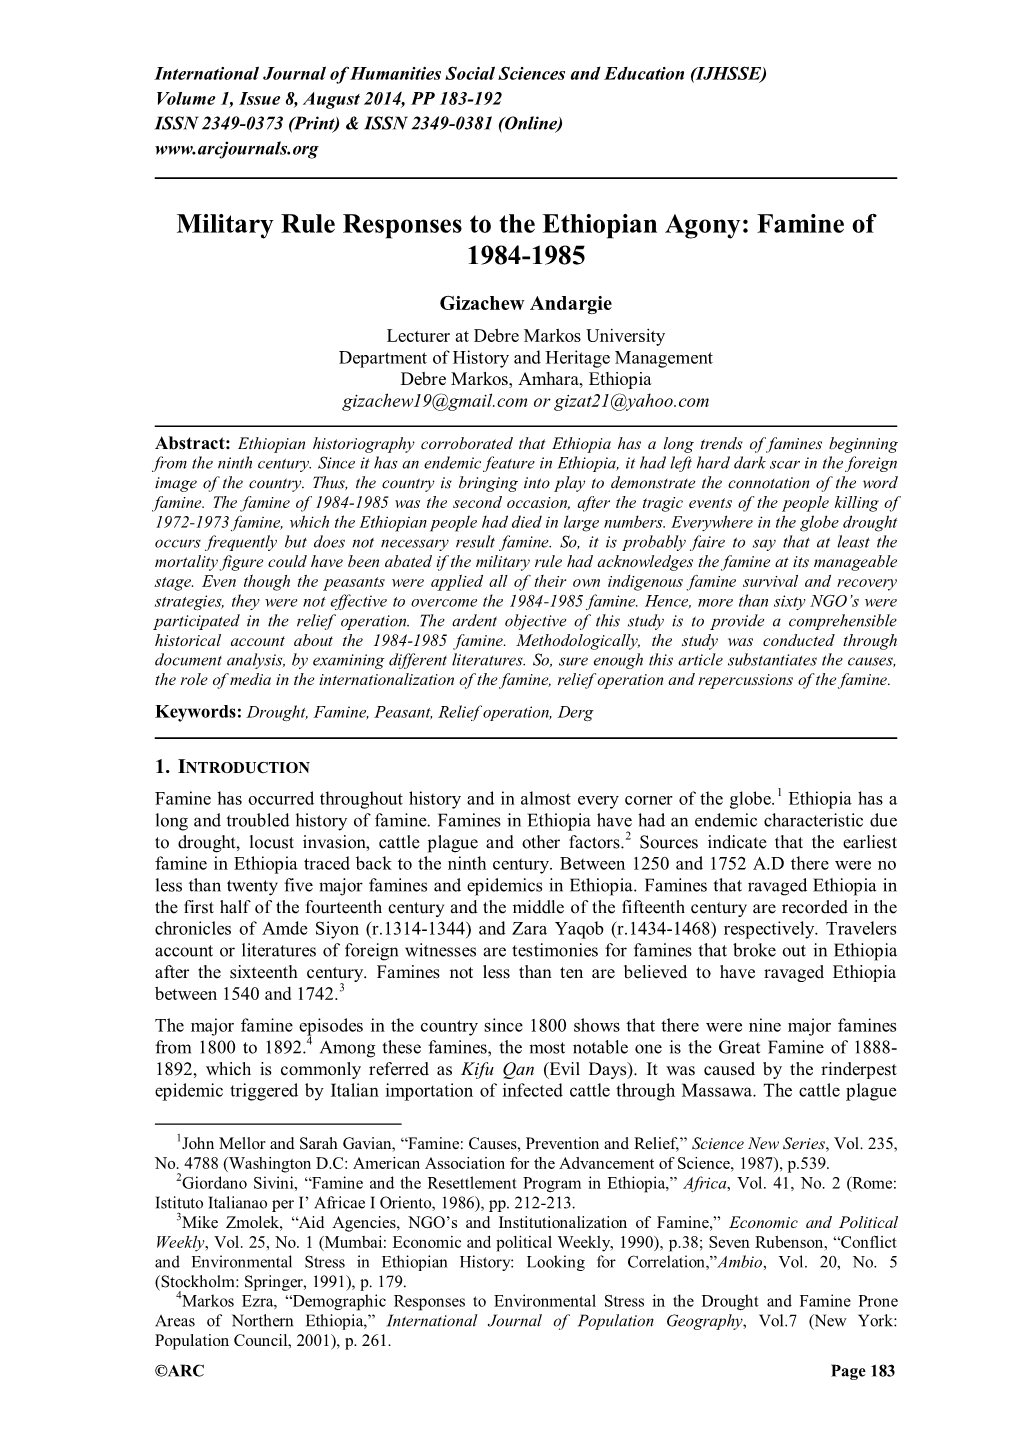 Military Rule Responses to the Ethiopian Agony: Famine of 1984-1985